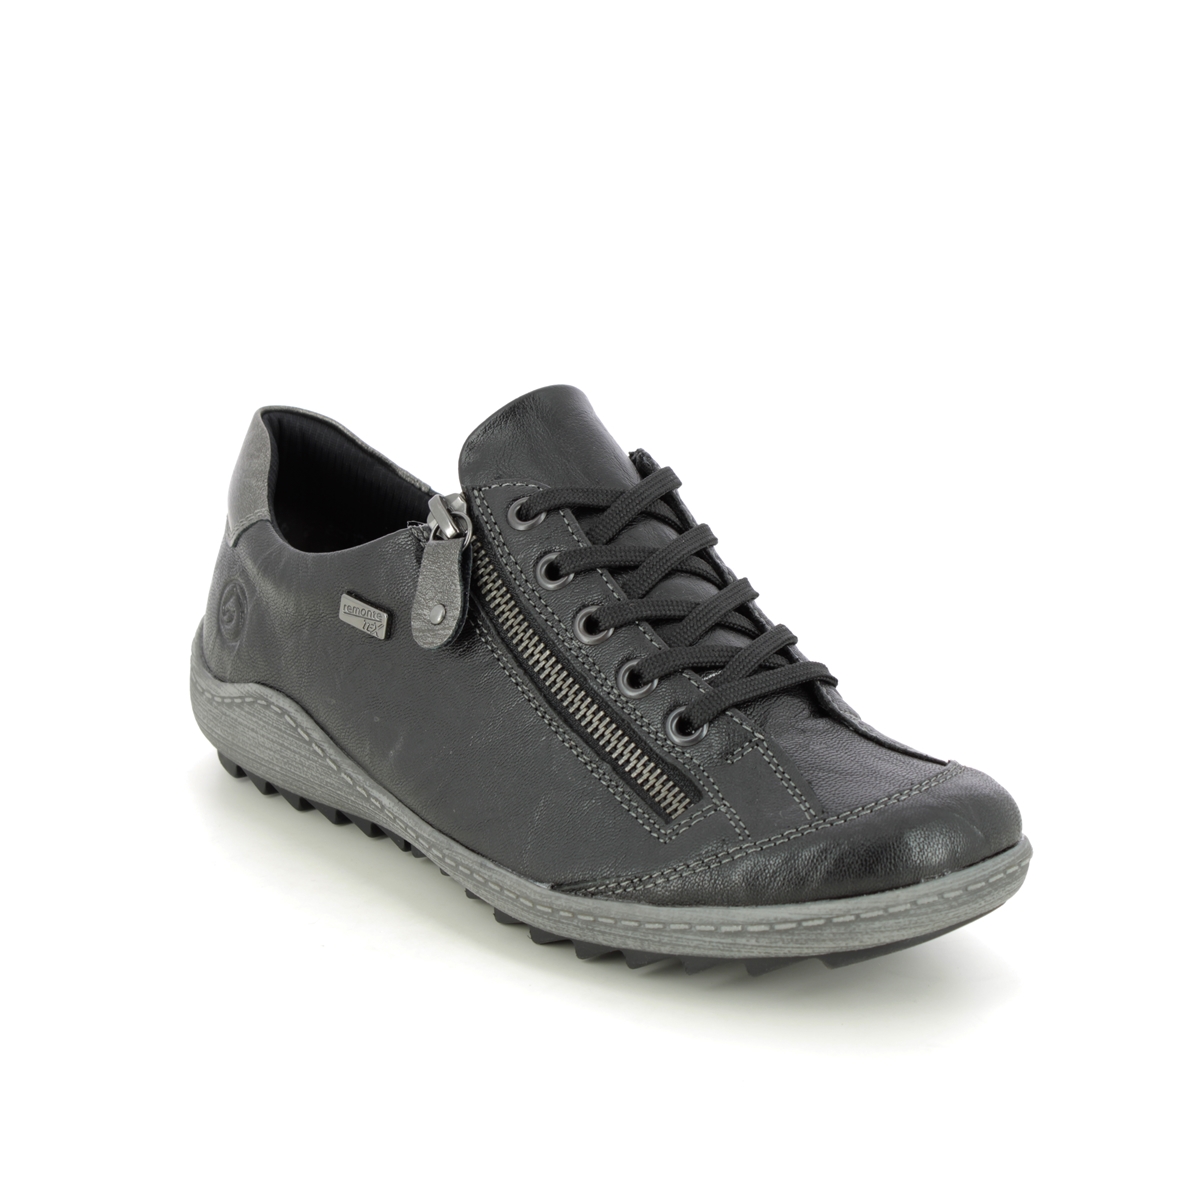 Remonte Zigzip 85 Tex Black Leather Womens Lacing Shoes R1402-06 In Size 42 In Plain Black Leather